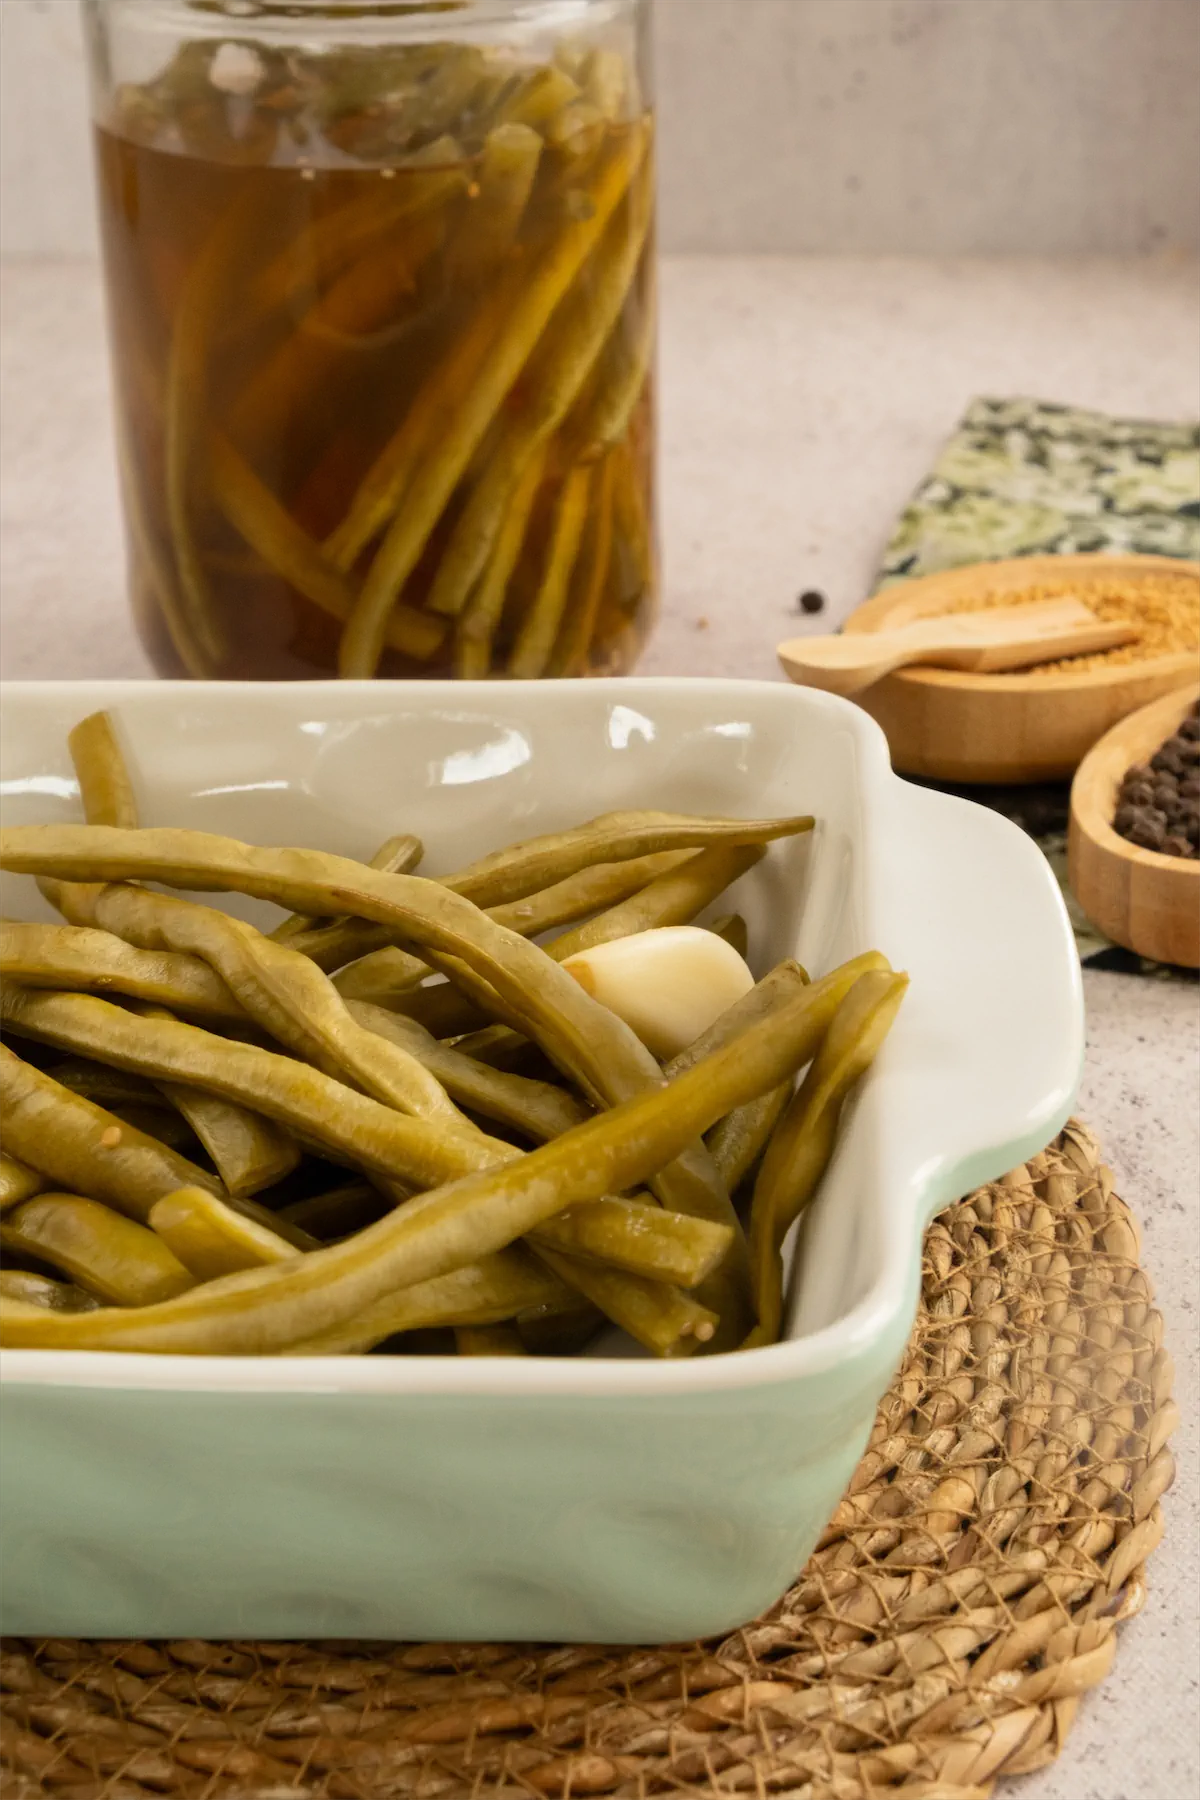 Homemade green bean pickles served in a square white bowl alongside the jar of same pickles.